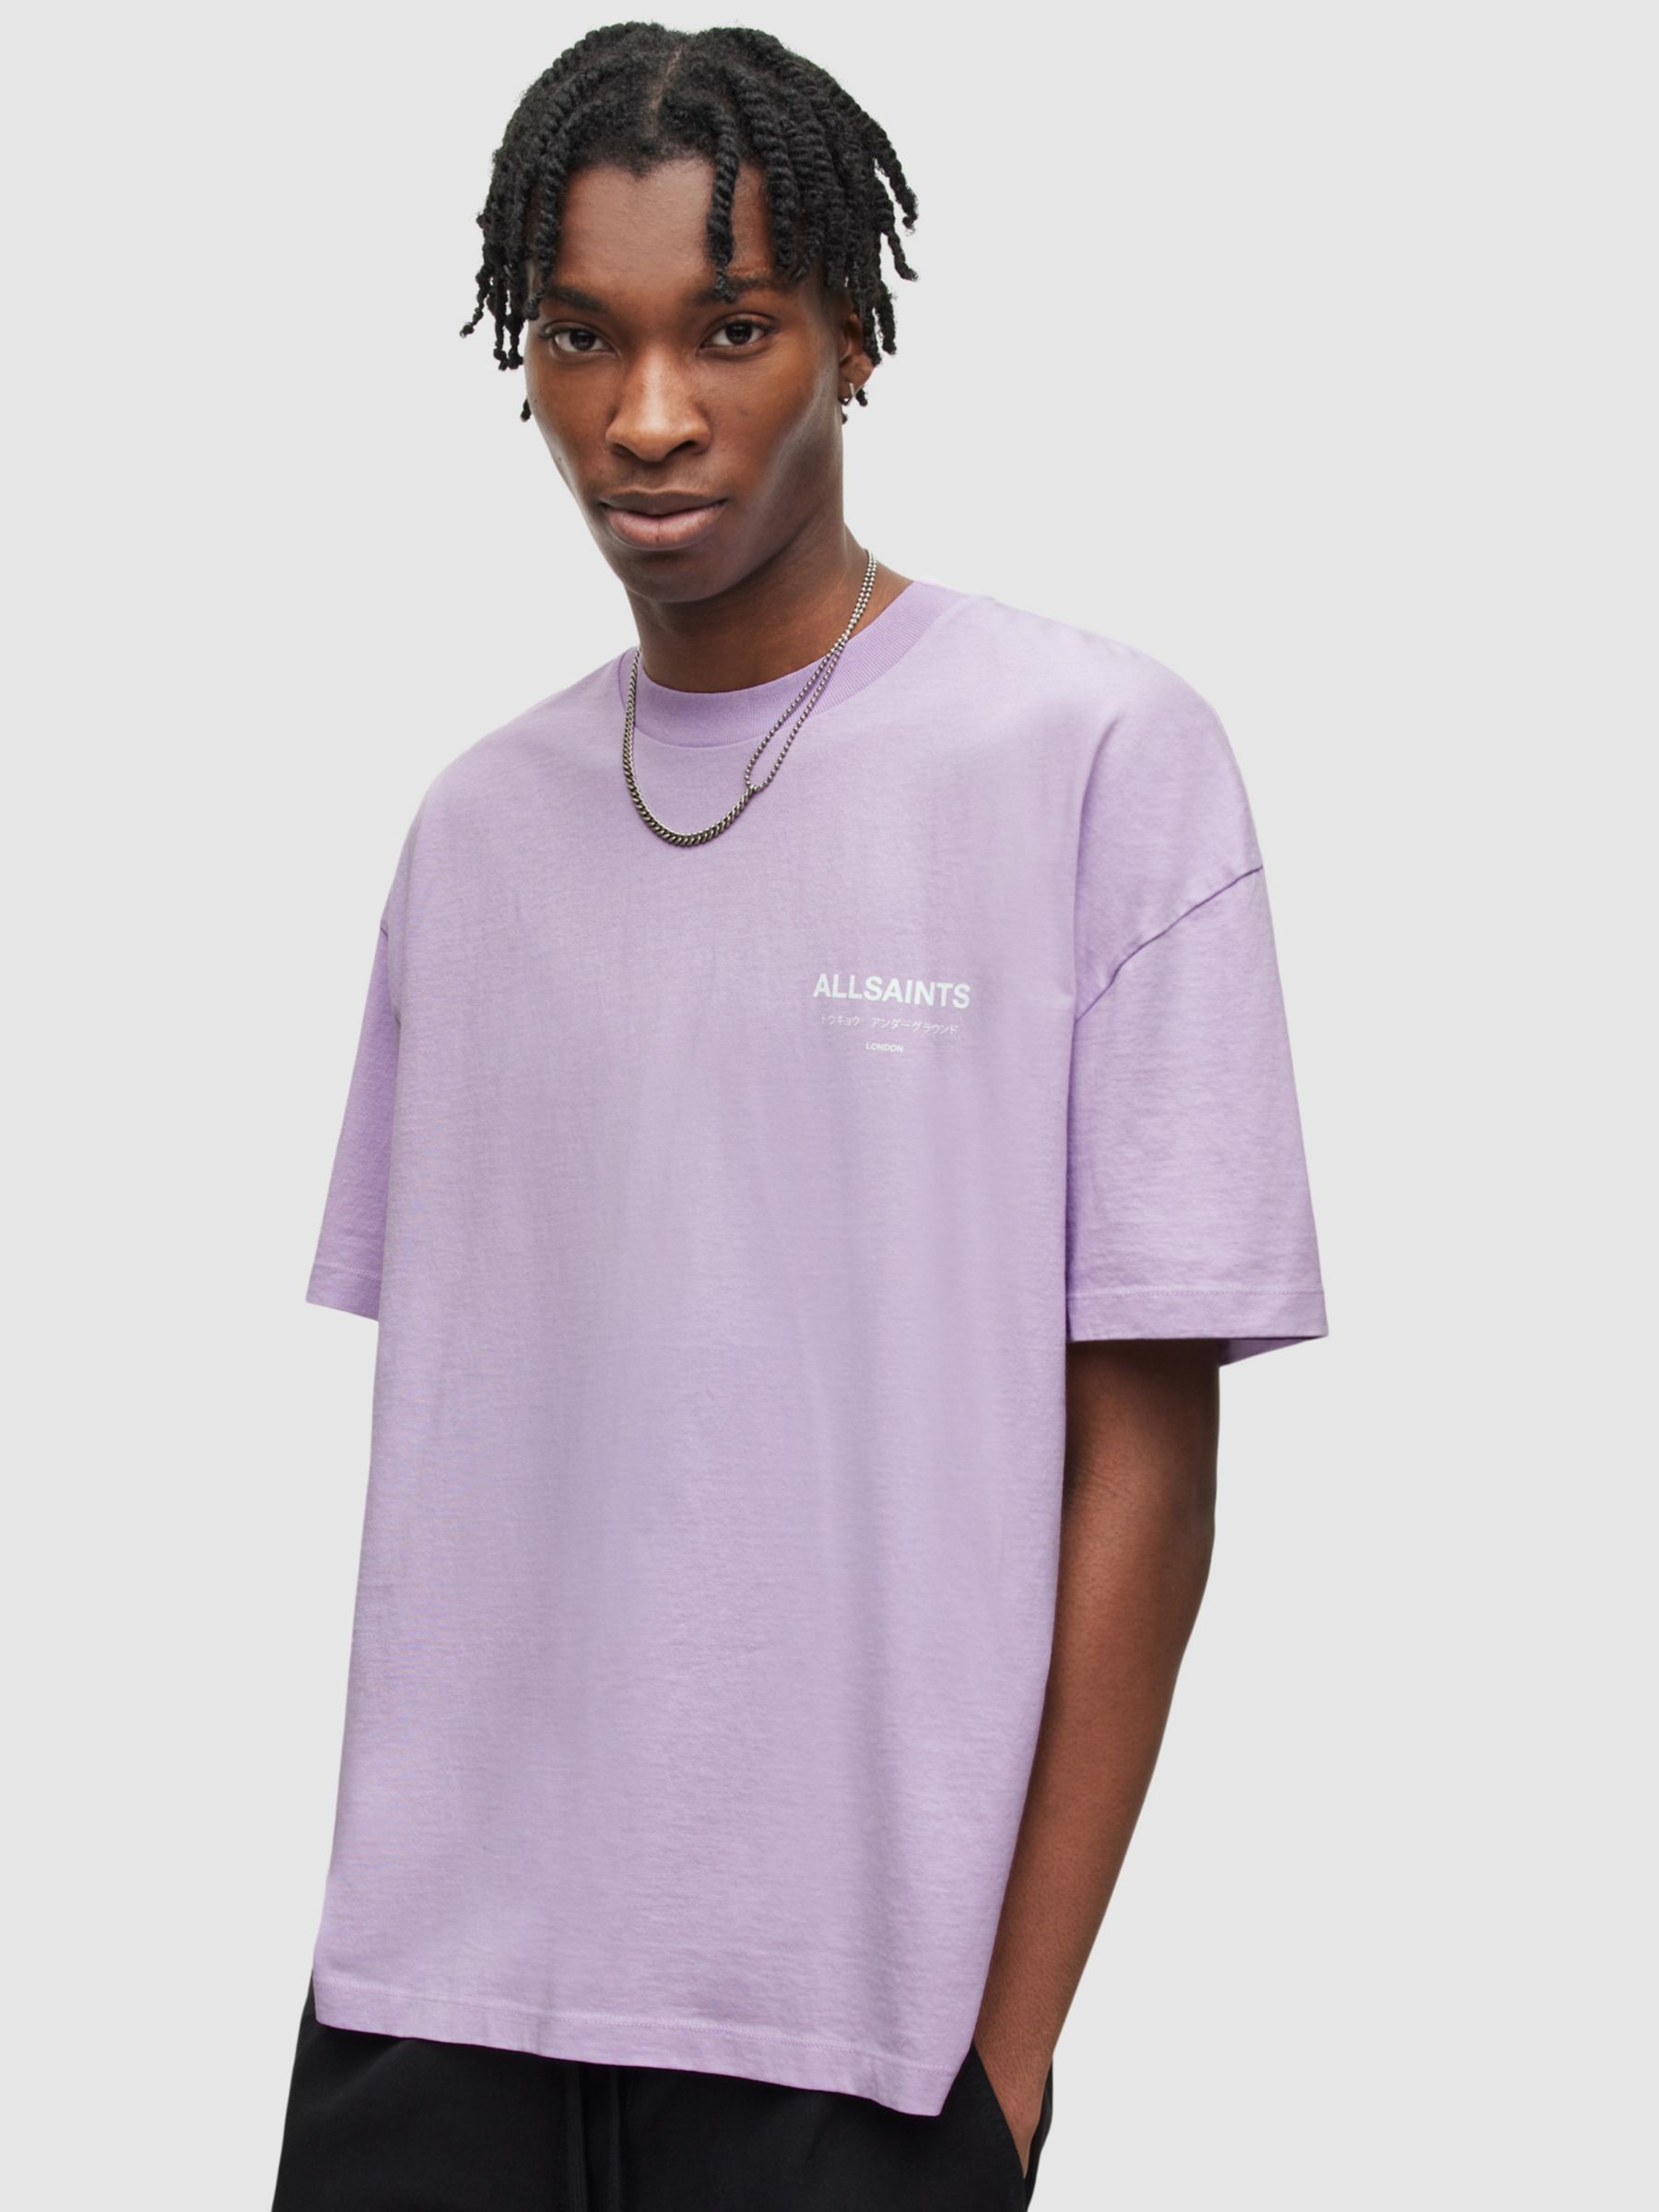 AllSaints Underground T-Shirt, Spring Lilac at John Lewis & Partners